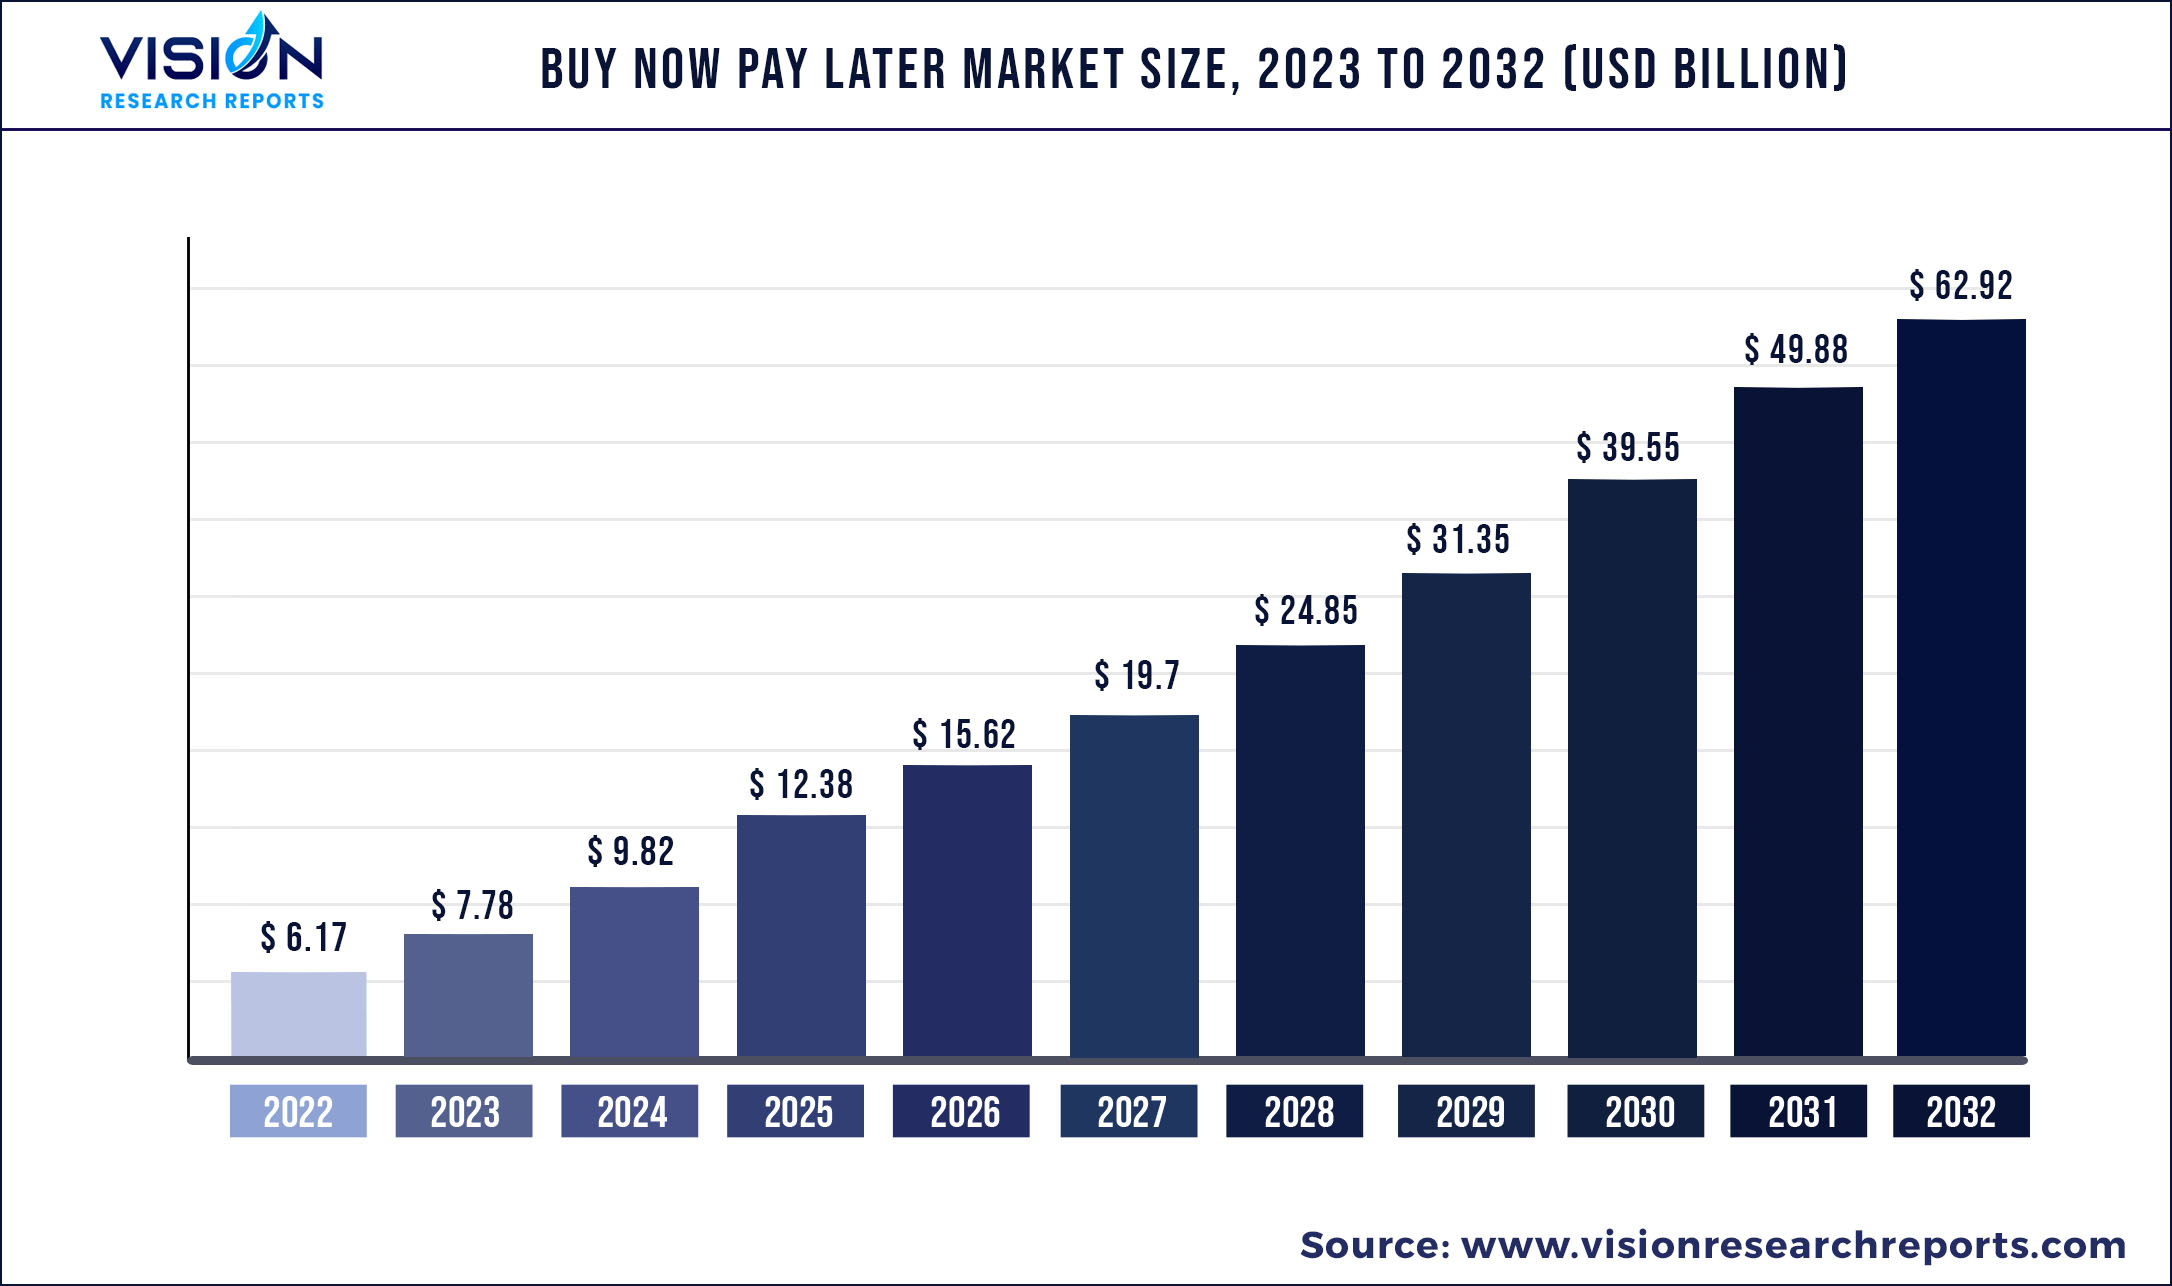 Buy Now Pay Later Market Size 2023 to 2032